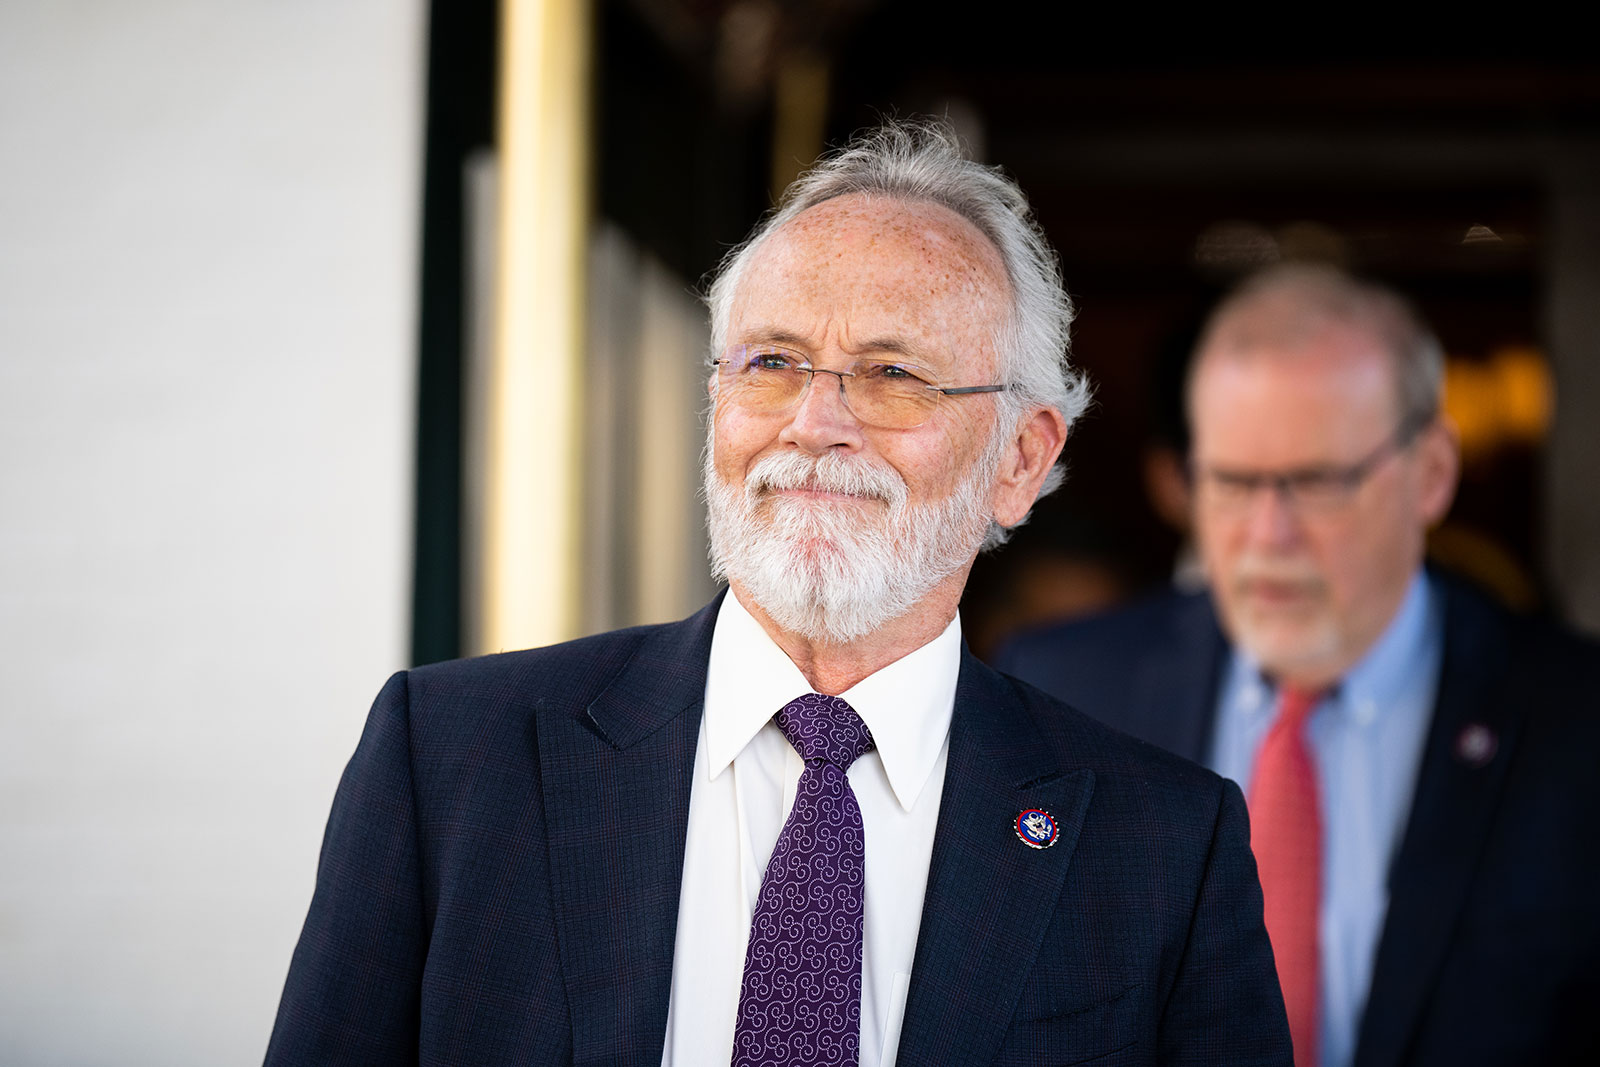 Rep. Dan Newhouse leaves the House Republican Conference caucus meeting in Washington, DC, on April 27.